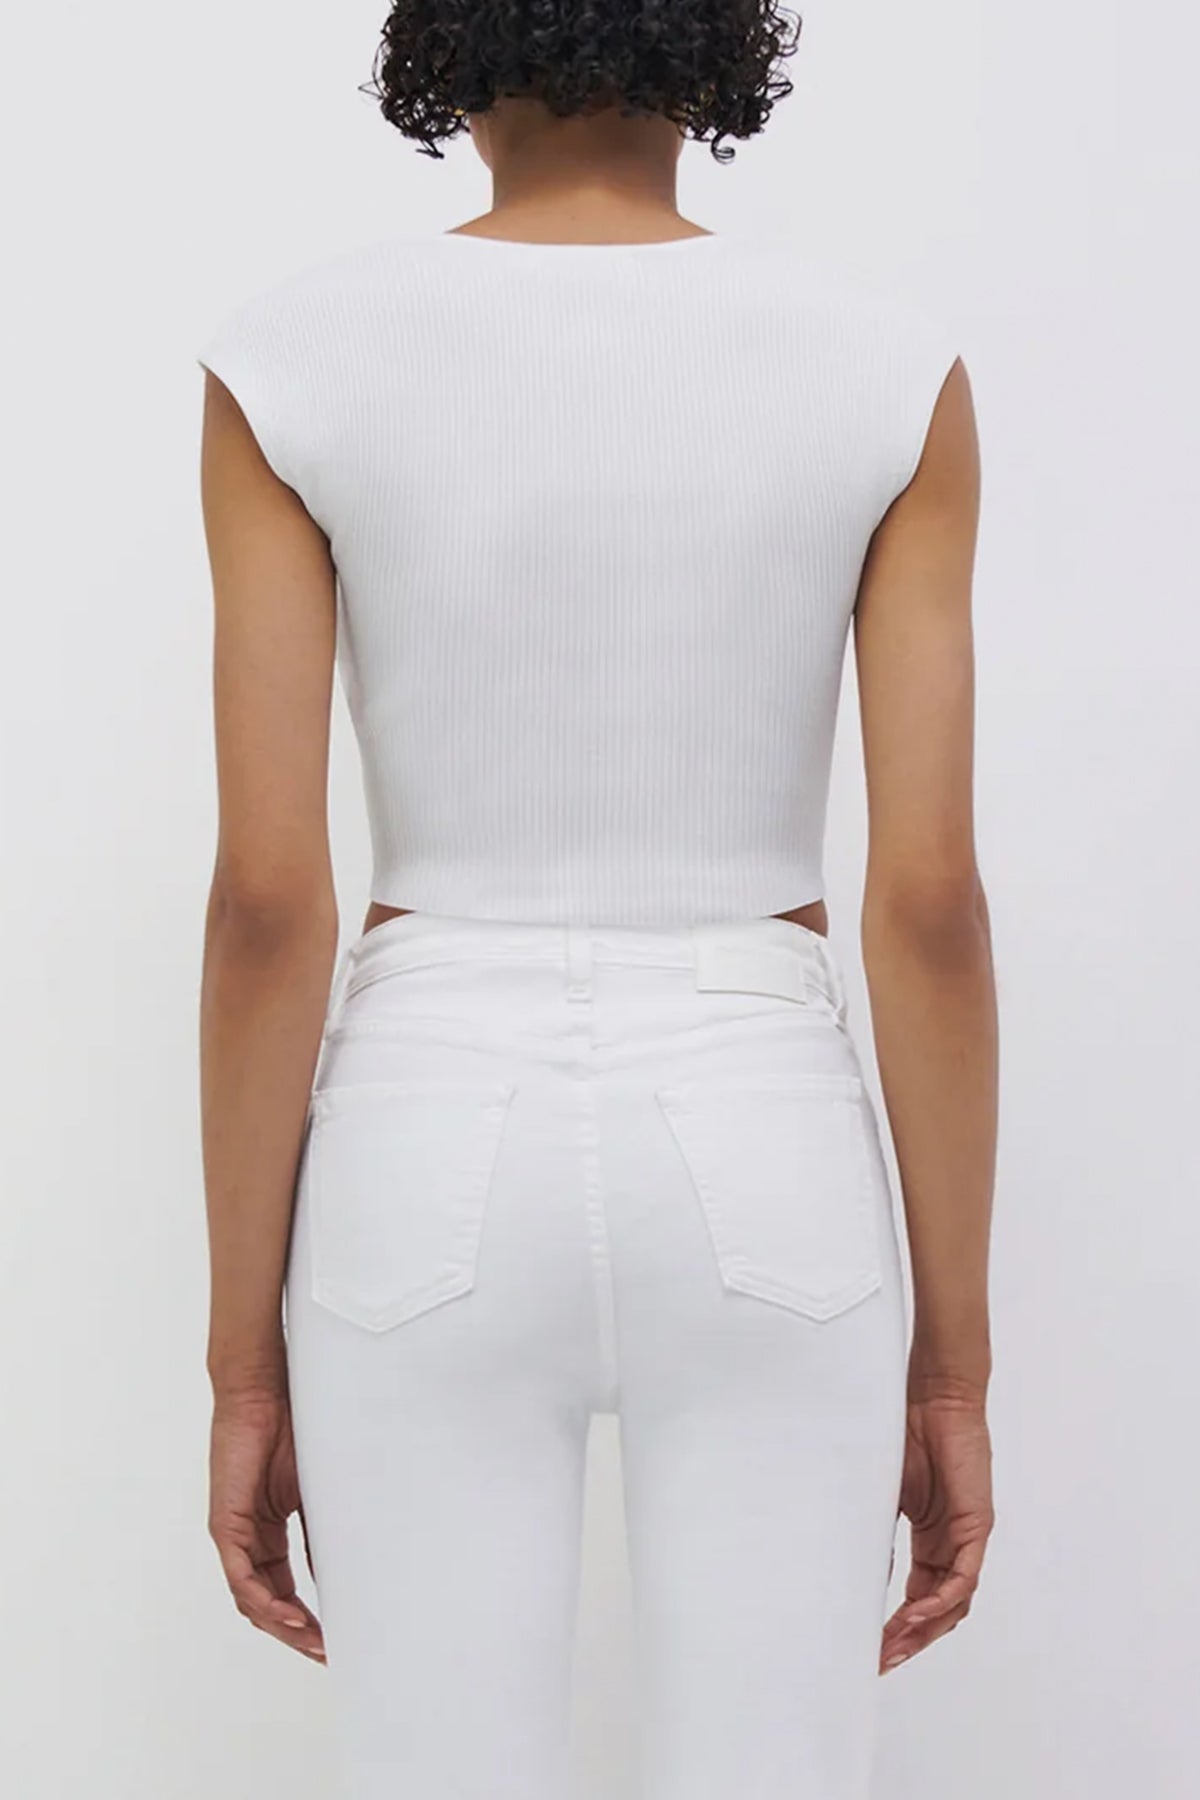 Abia Cropped Top in White - shop-olivia.com